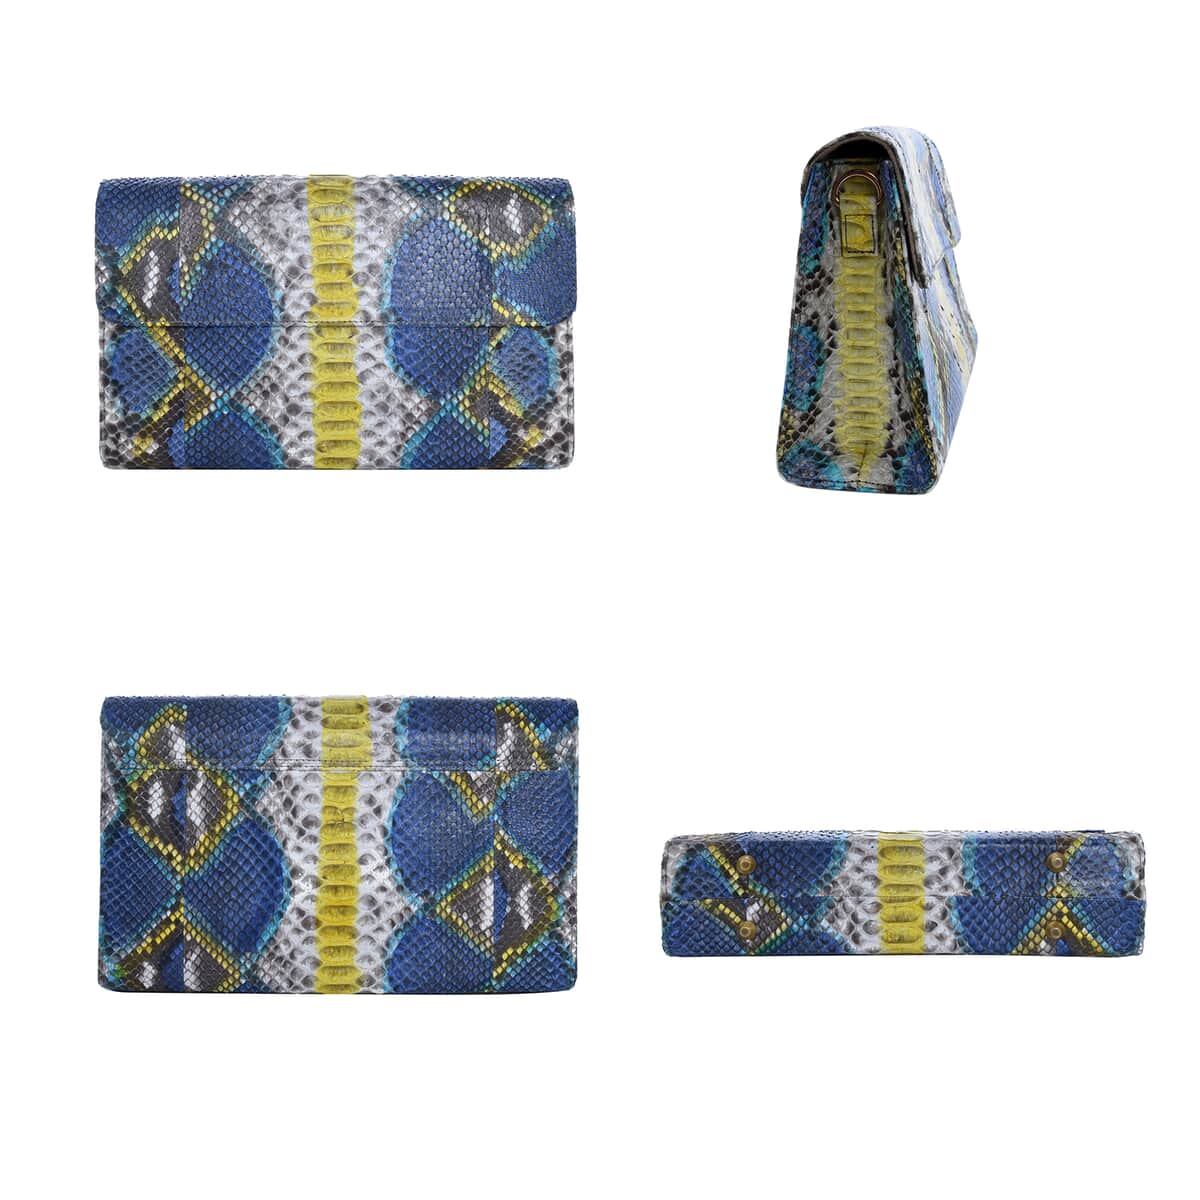 The Pelle Collection Peacock Blue Python Leather Evening Clutch Bag with Detachable Strap, Clutches for Women, Leather Handbag, Clutch Purse image number 2